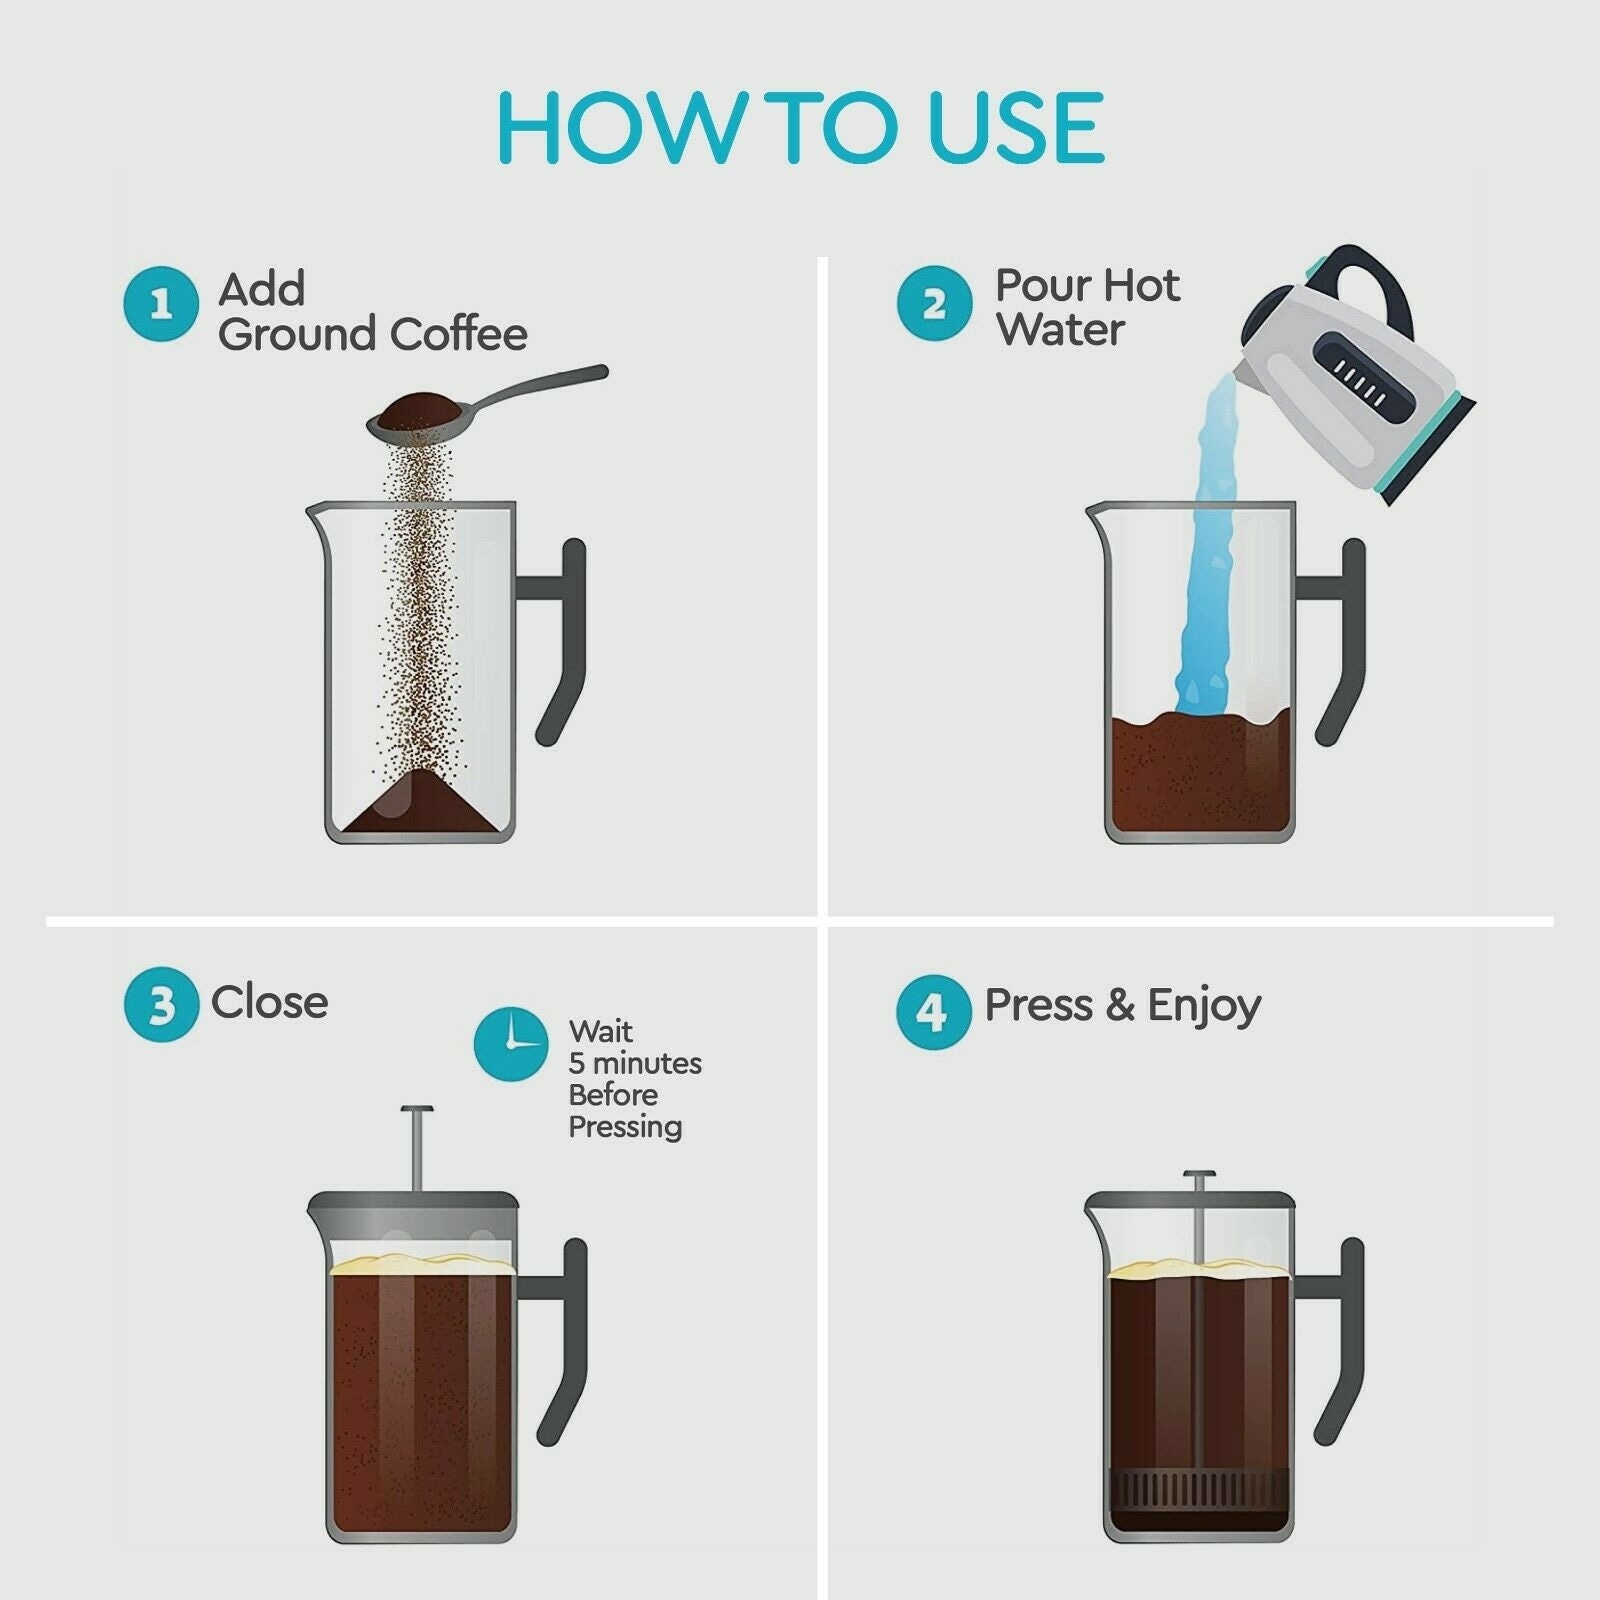 Can You Make Espresso With A French Press? Cliff & Pebble